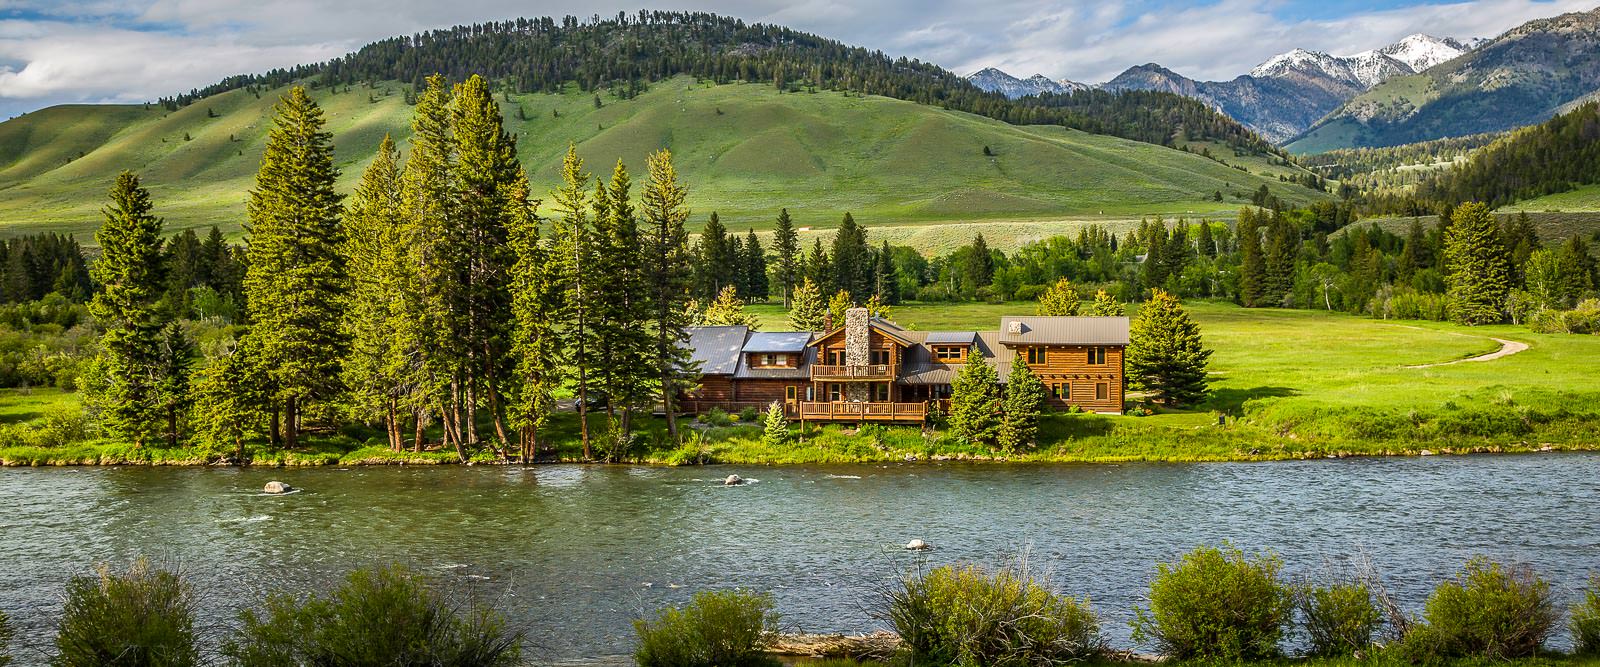 Montana Fly Fishing Guides, Montana Fly Fishing Lodges